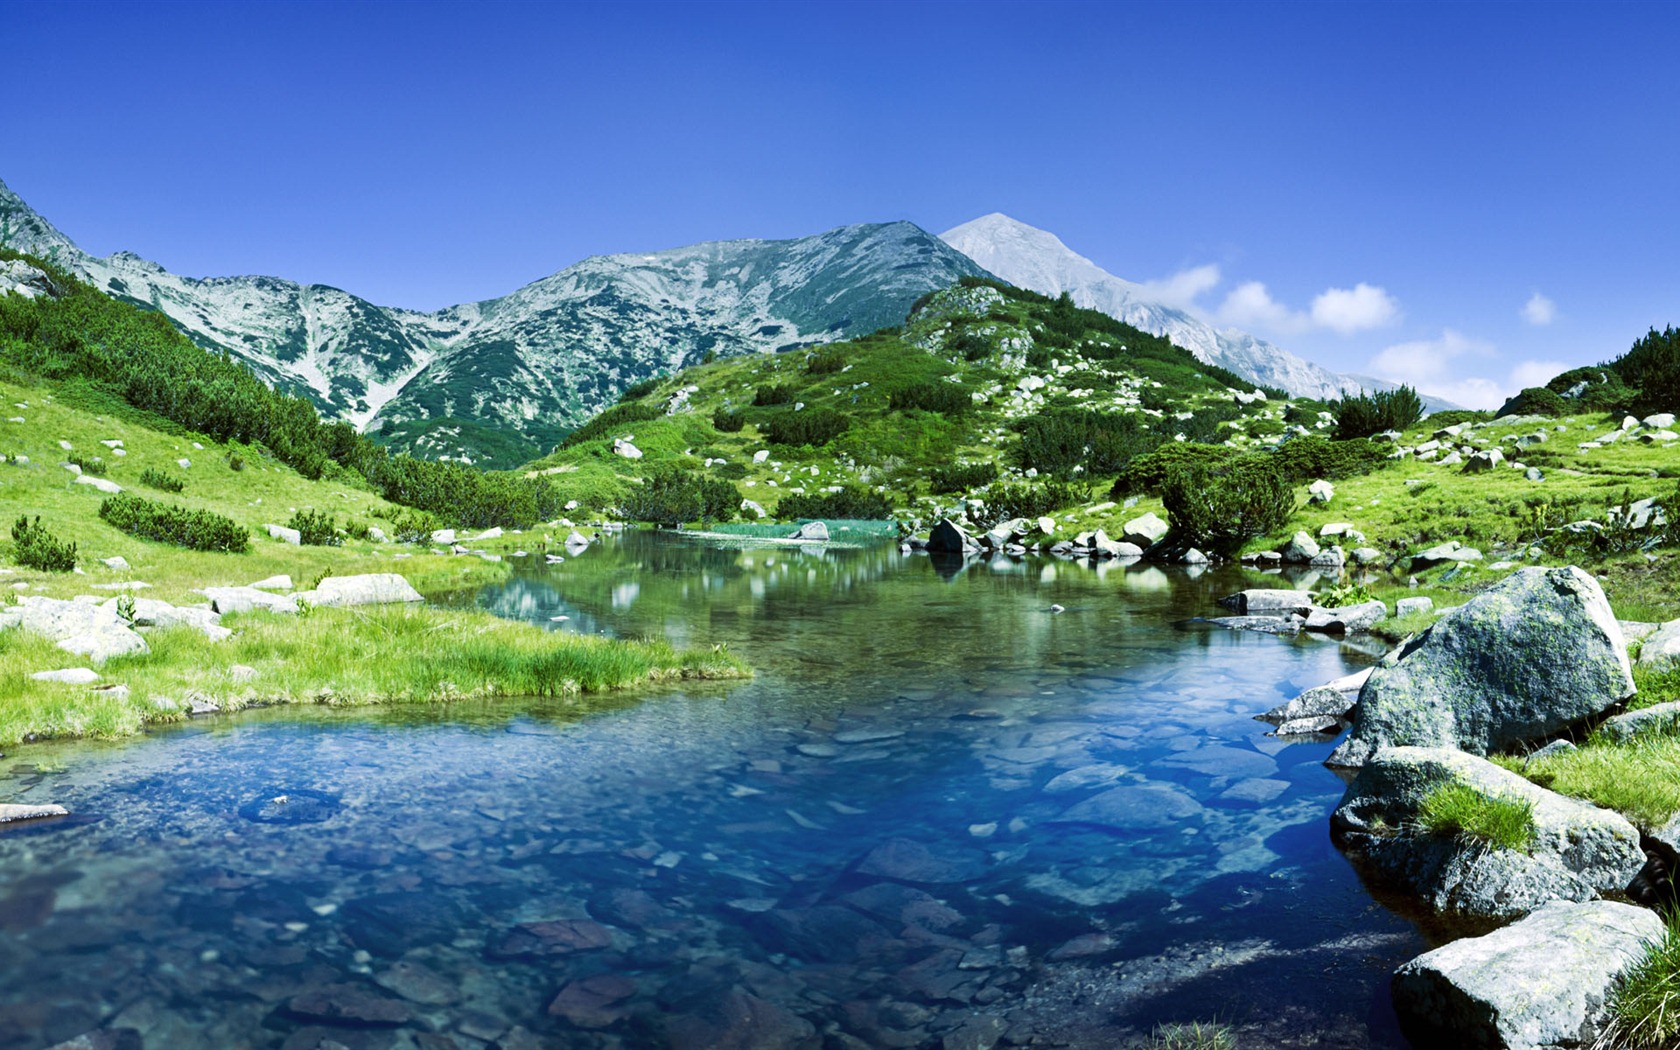 Windows 8 official panoramic wallpaper, waves, forests, majestic mountains #17 - 1680x1050